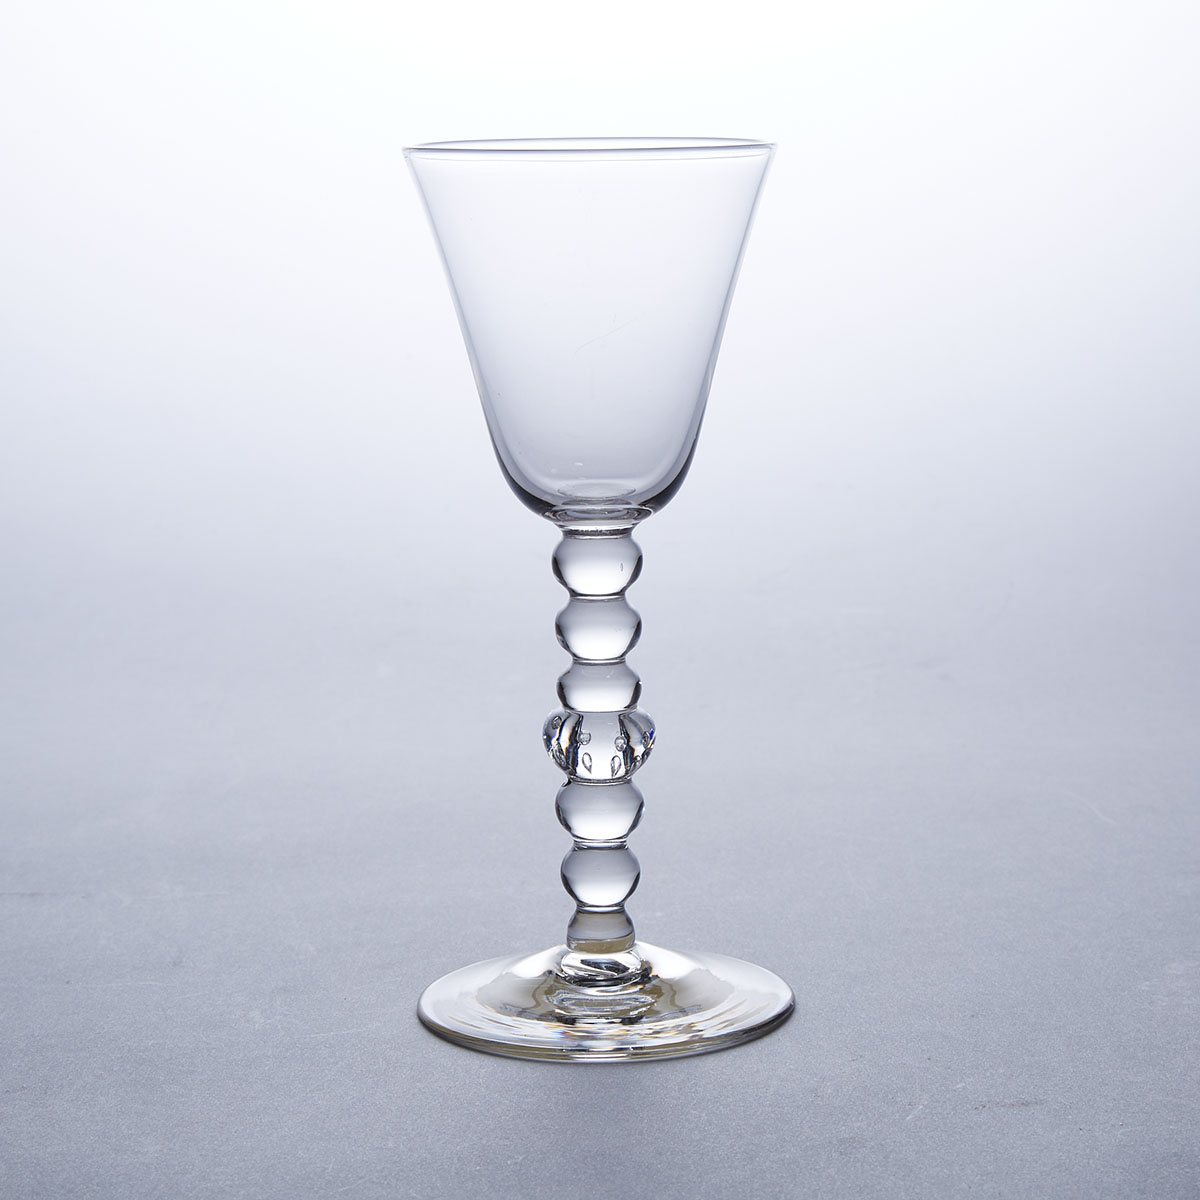 English Teared Bobbin Knopped Large Wine Glass, mid-18th century